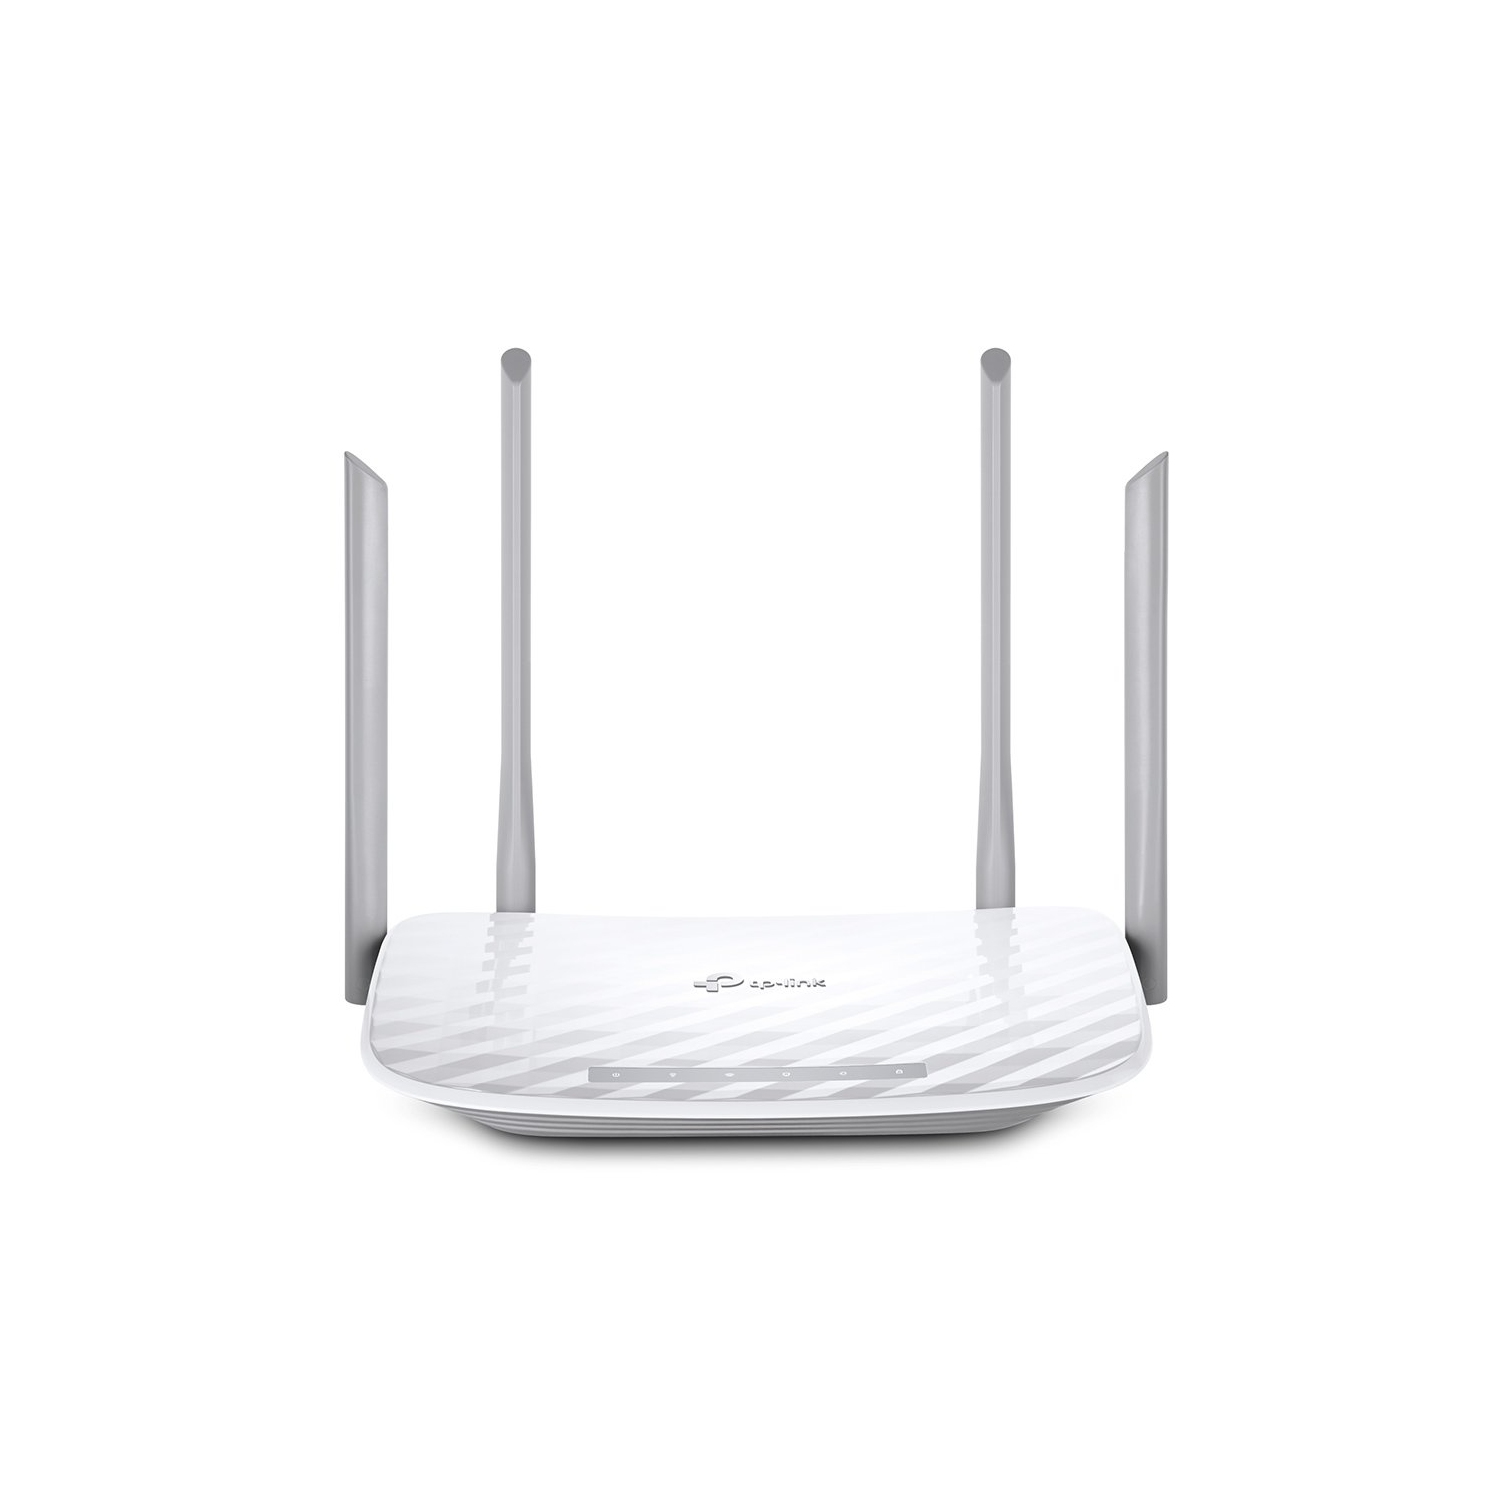 TP-Link Archer C50 AC1200 Dual Band Wireless Wi-Fi Router w/4 External Antennas